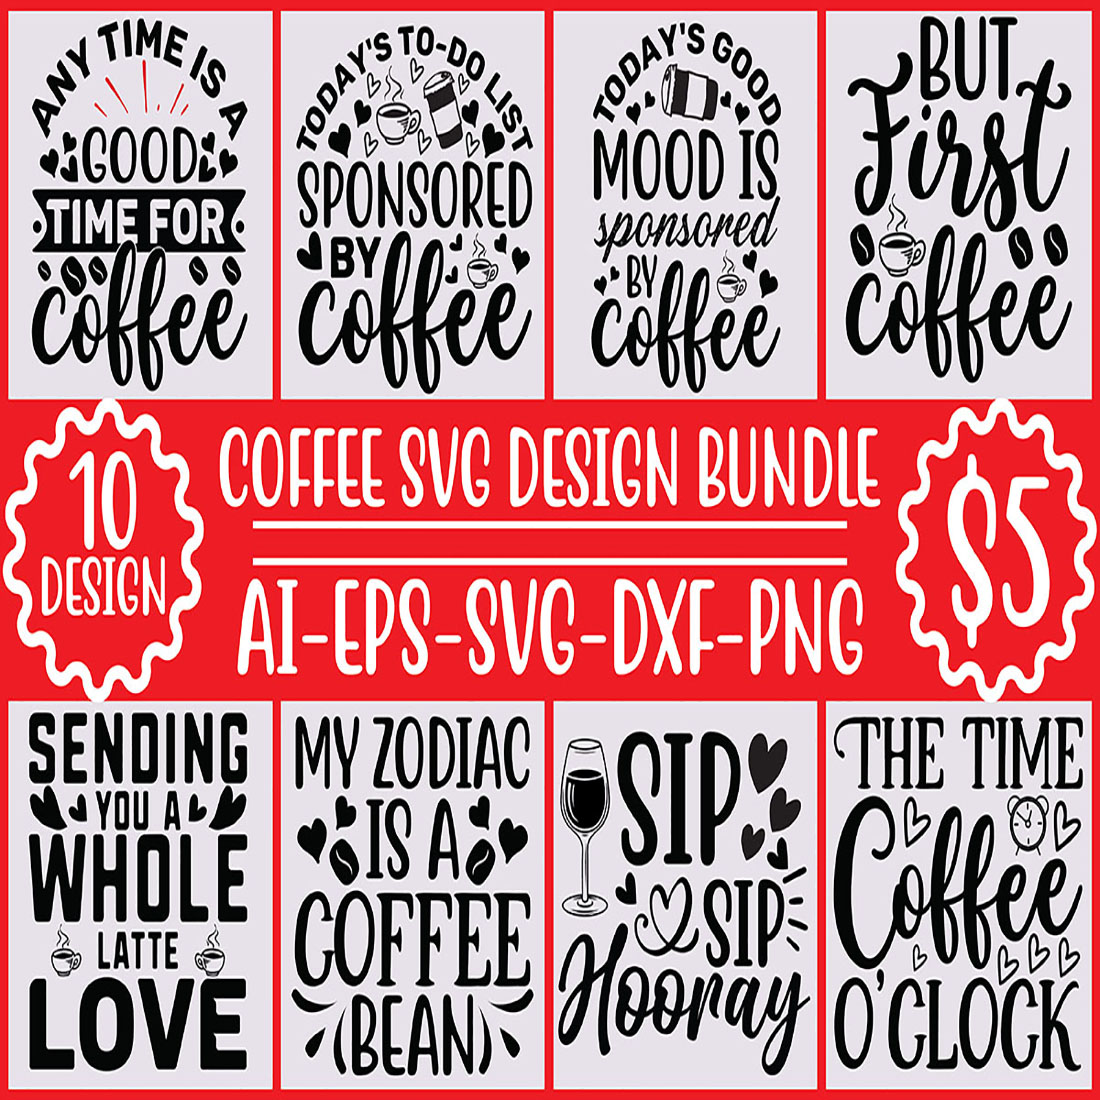 10 Coffee SVG Design Bundle Vector Template cover image.